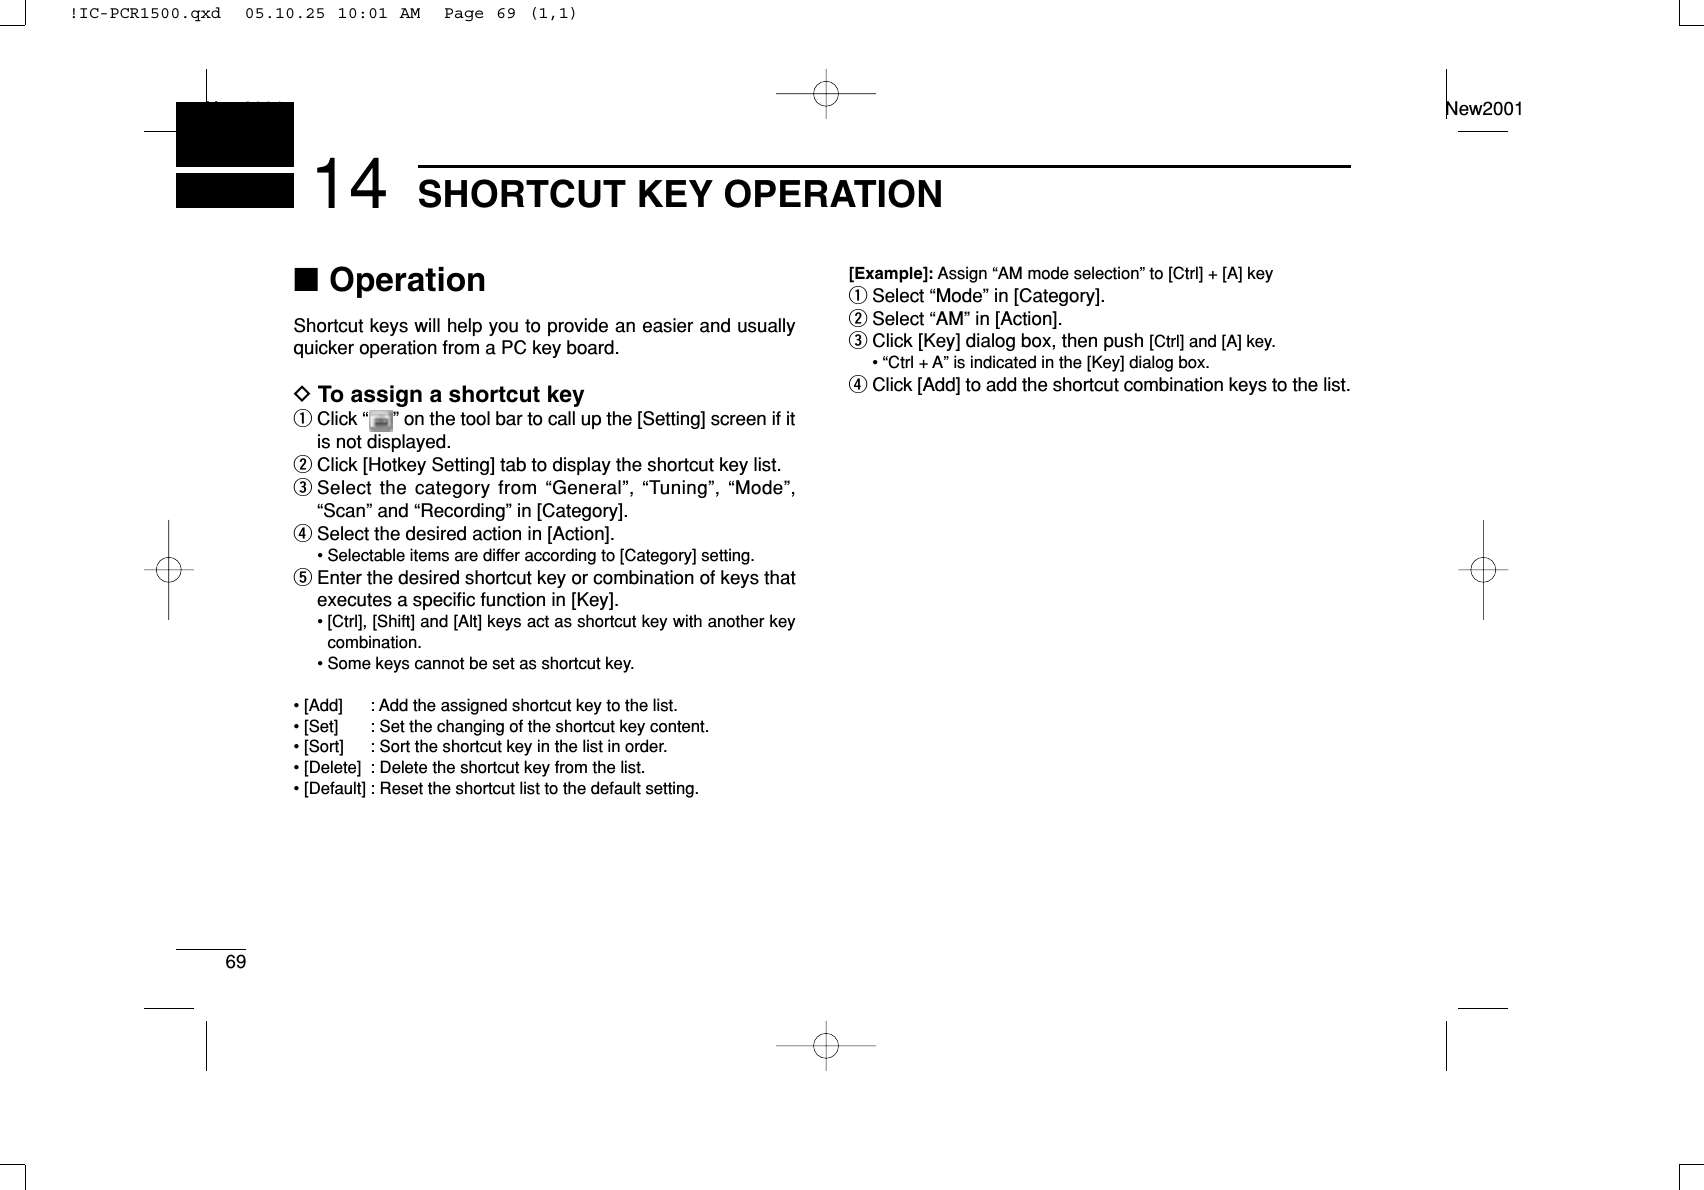 69SHORTCUT KEY OPERATIONNew2001New200114■OperationShortcut keys will help you to provide an easier and usuallyquicker operation from a PC key board.DTo assign a shortcut keyqClick “ ” on the tool bar to call up the [Setting] screen if itis not displayed.wClick [Hotkey Setting] tab to display the shortcut key list.eSelect the category from “General”, “Tuning”, “Mode”,“Scan” and “Recording” in [Category].rSelect the desired action in [Action].• Selectable items are differ according to [Category] setting.tEnter the desired shortcut key or combination of keys thatexecutes a speciﬁc function in [Key].• [Ctrl], [Shift] and [Alt] keys act as shortcut key with another keycombination.• Some keys cannot be set as shortcut key.• [Add] : Add the assigned shortcut key to the list.• [Set] : Set the changing of the shortcut key content.• [Sort] : Sort the shortcut key in the list in order.• [Delete] : Delete the shortcut key from the list.• [Default] : Reset the shortcut list to the default setting.[Example]: Assign “AM mode selection” to [Ctrl] + [A] keyqSelect “Mode” in [Category].wSelect “AM” in [Action].eClick [Key] dialog box, then push [Ctrl] and [A] key.• “Ctrl + A” is indicated in the [Key] dialog box.rClick [Add] to add the shortcut combination keys to the list.!IC-PCR1500.qxd  05.10.25 10:01 AM  Page 69 (1,1)